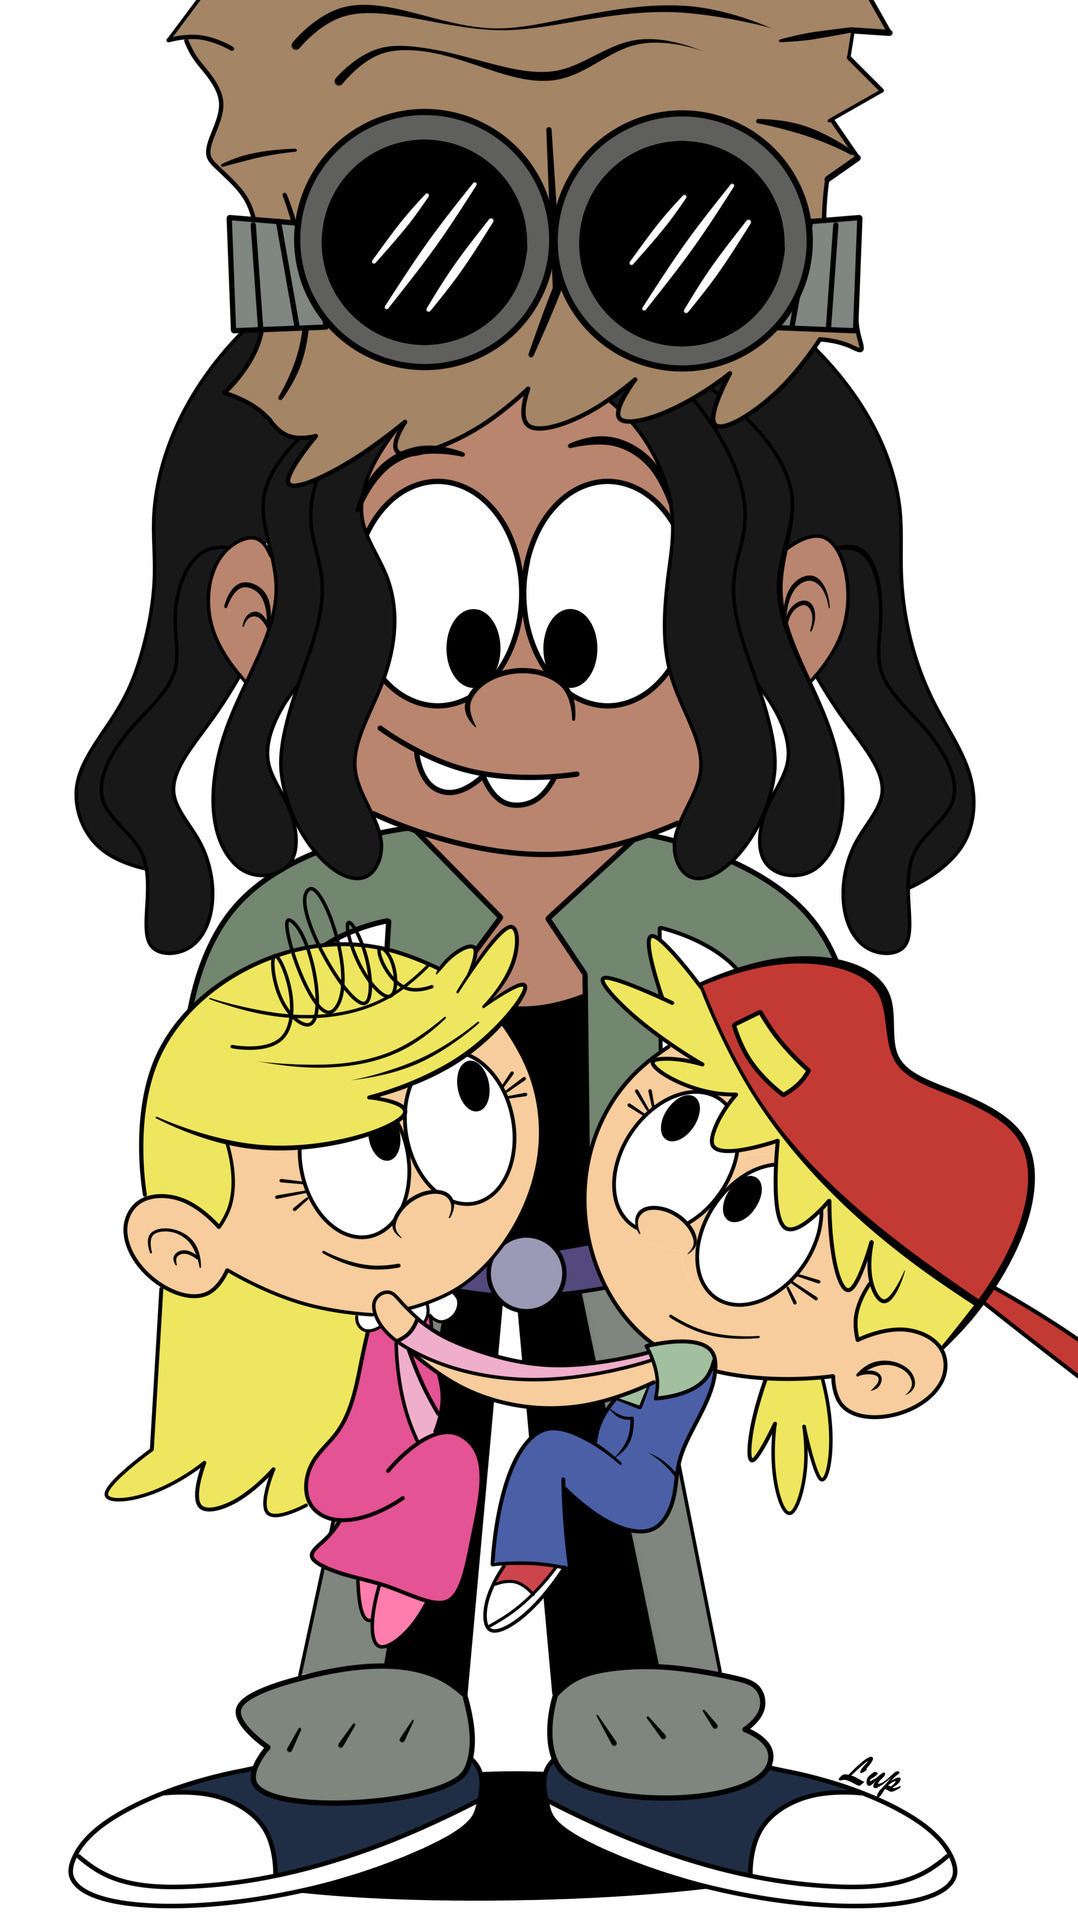 Little Johnny x Lola and Lana by 364wii on DeviantArt